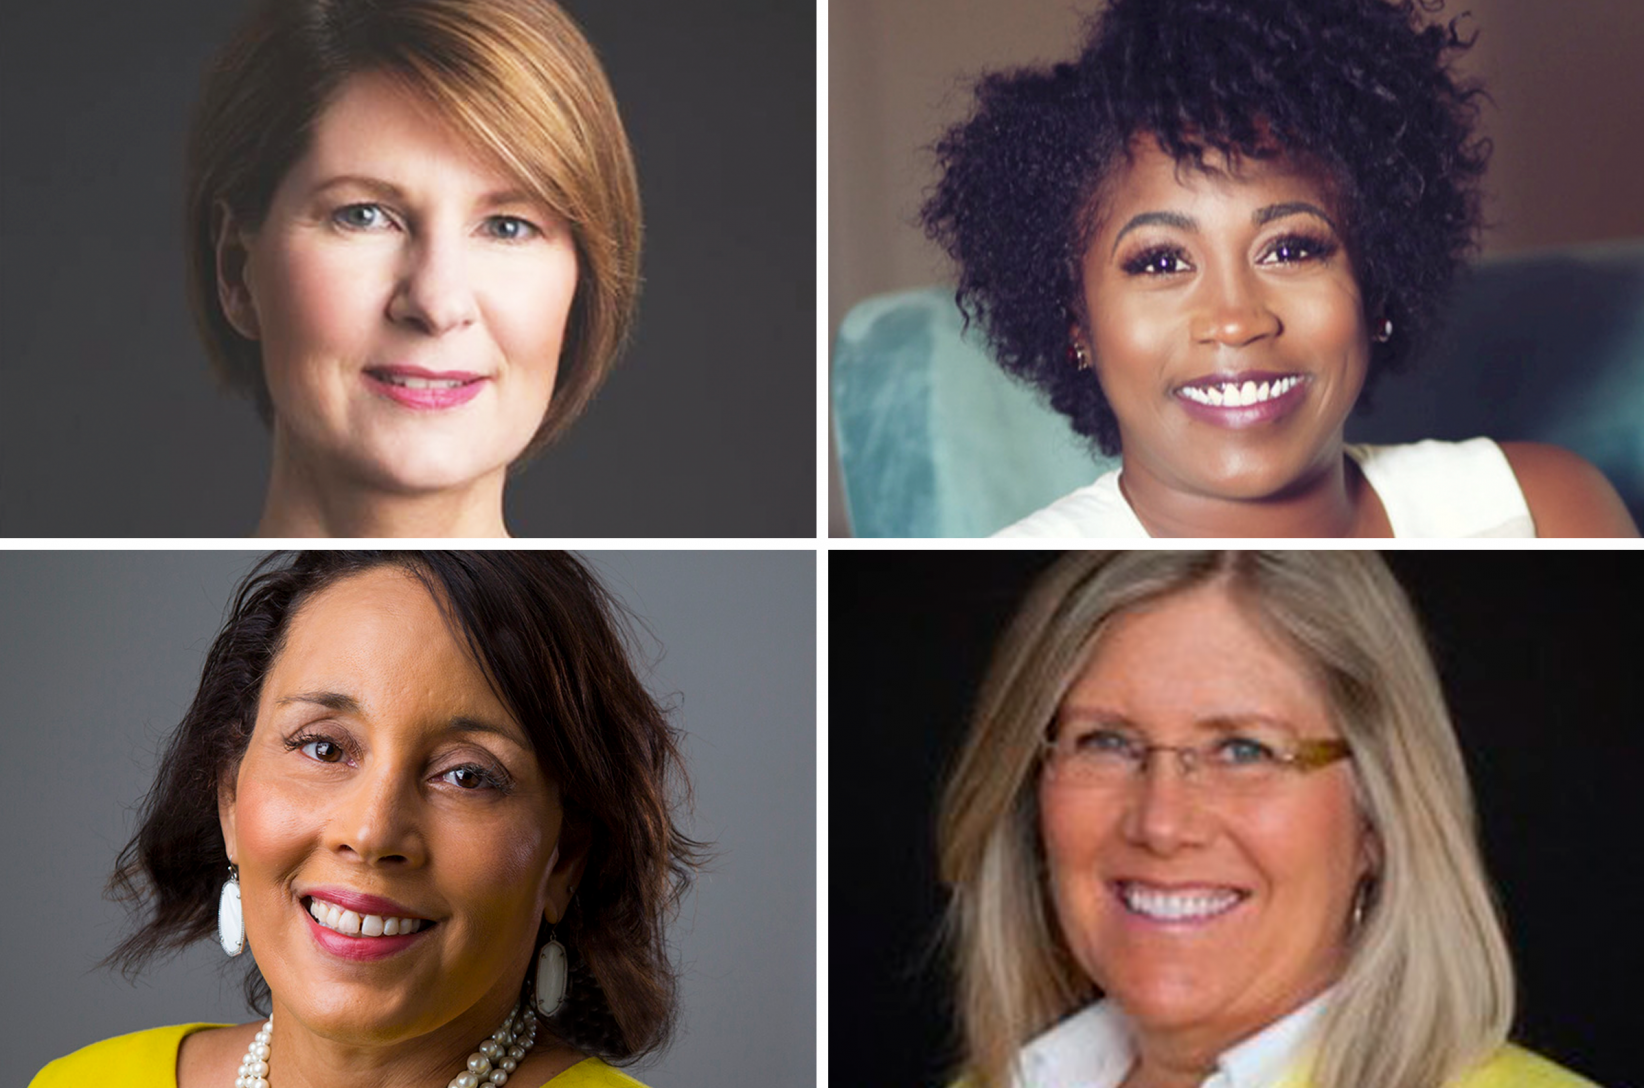 Women2Women tour: Conversation in Kansas City will ripple back to lawmakers in DC